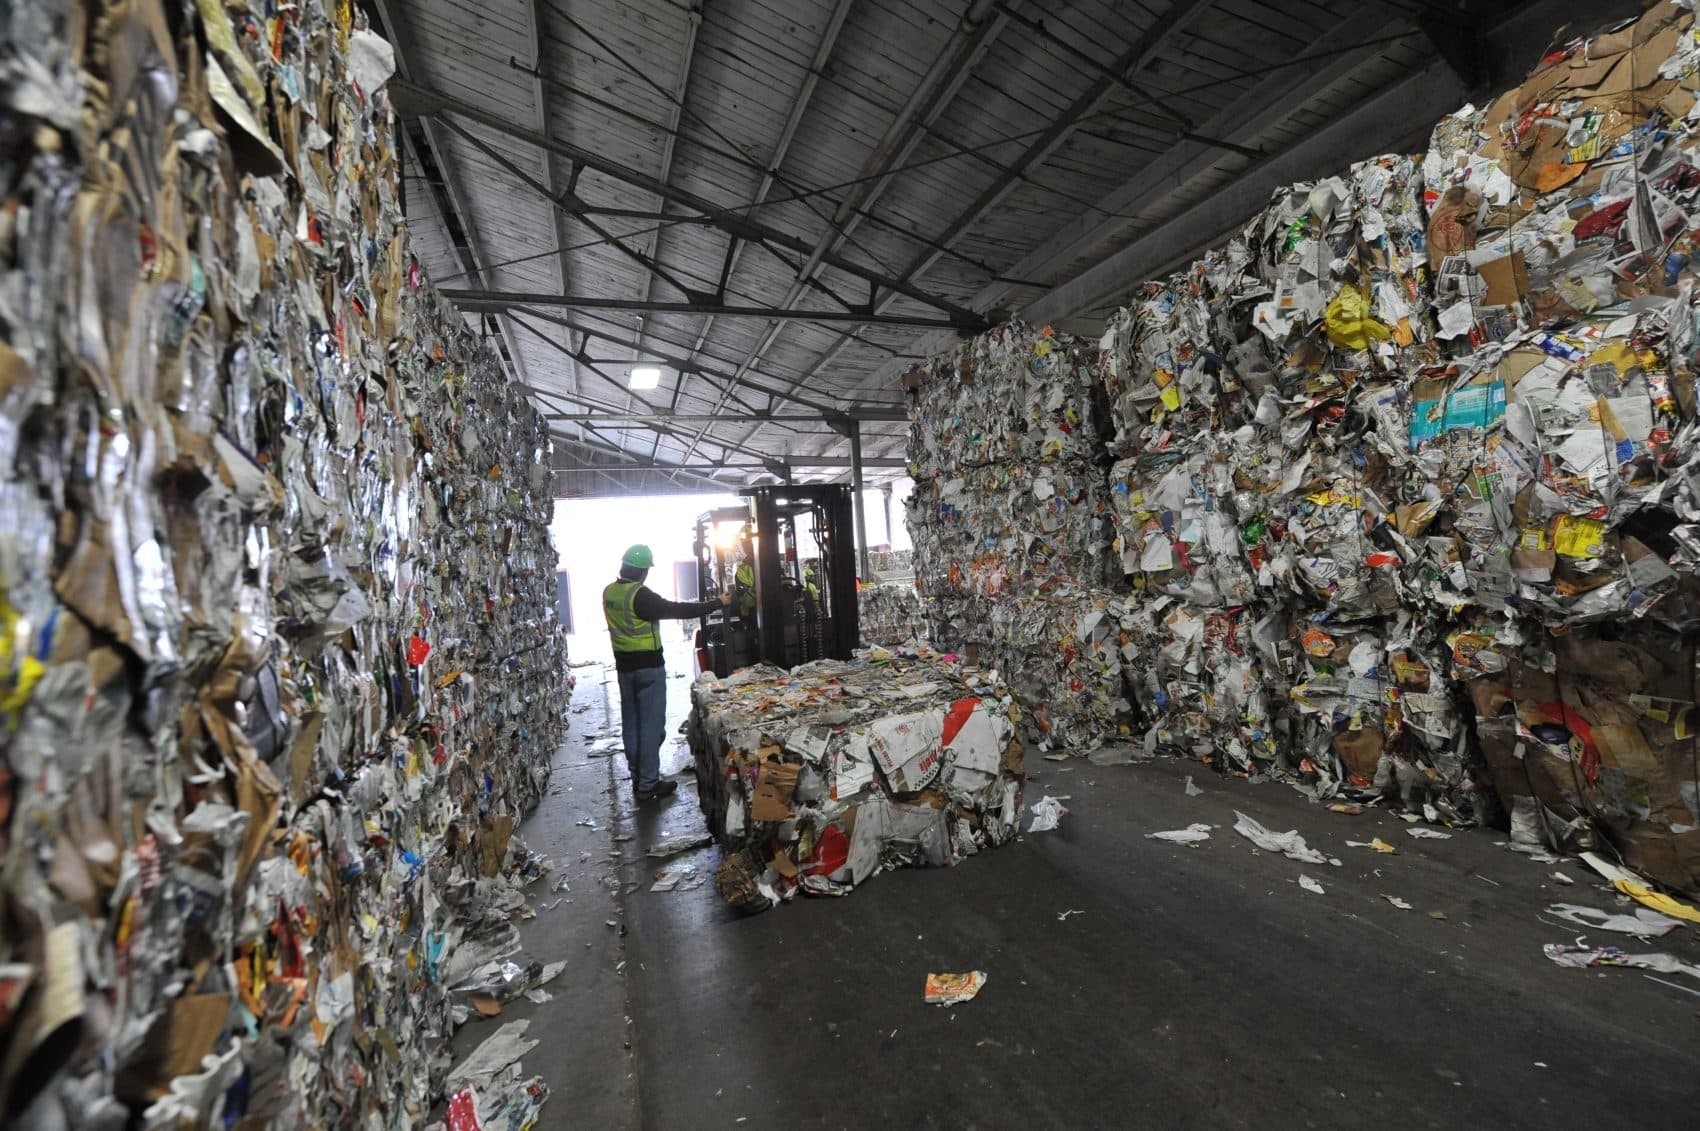 As online retailers like Amazon continue to grow, companies like Waste Management -- the largest disposal company in the U.S. -- have to adapt. (Courtesy Waste Management)